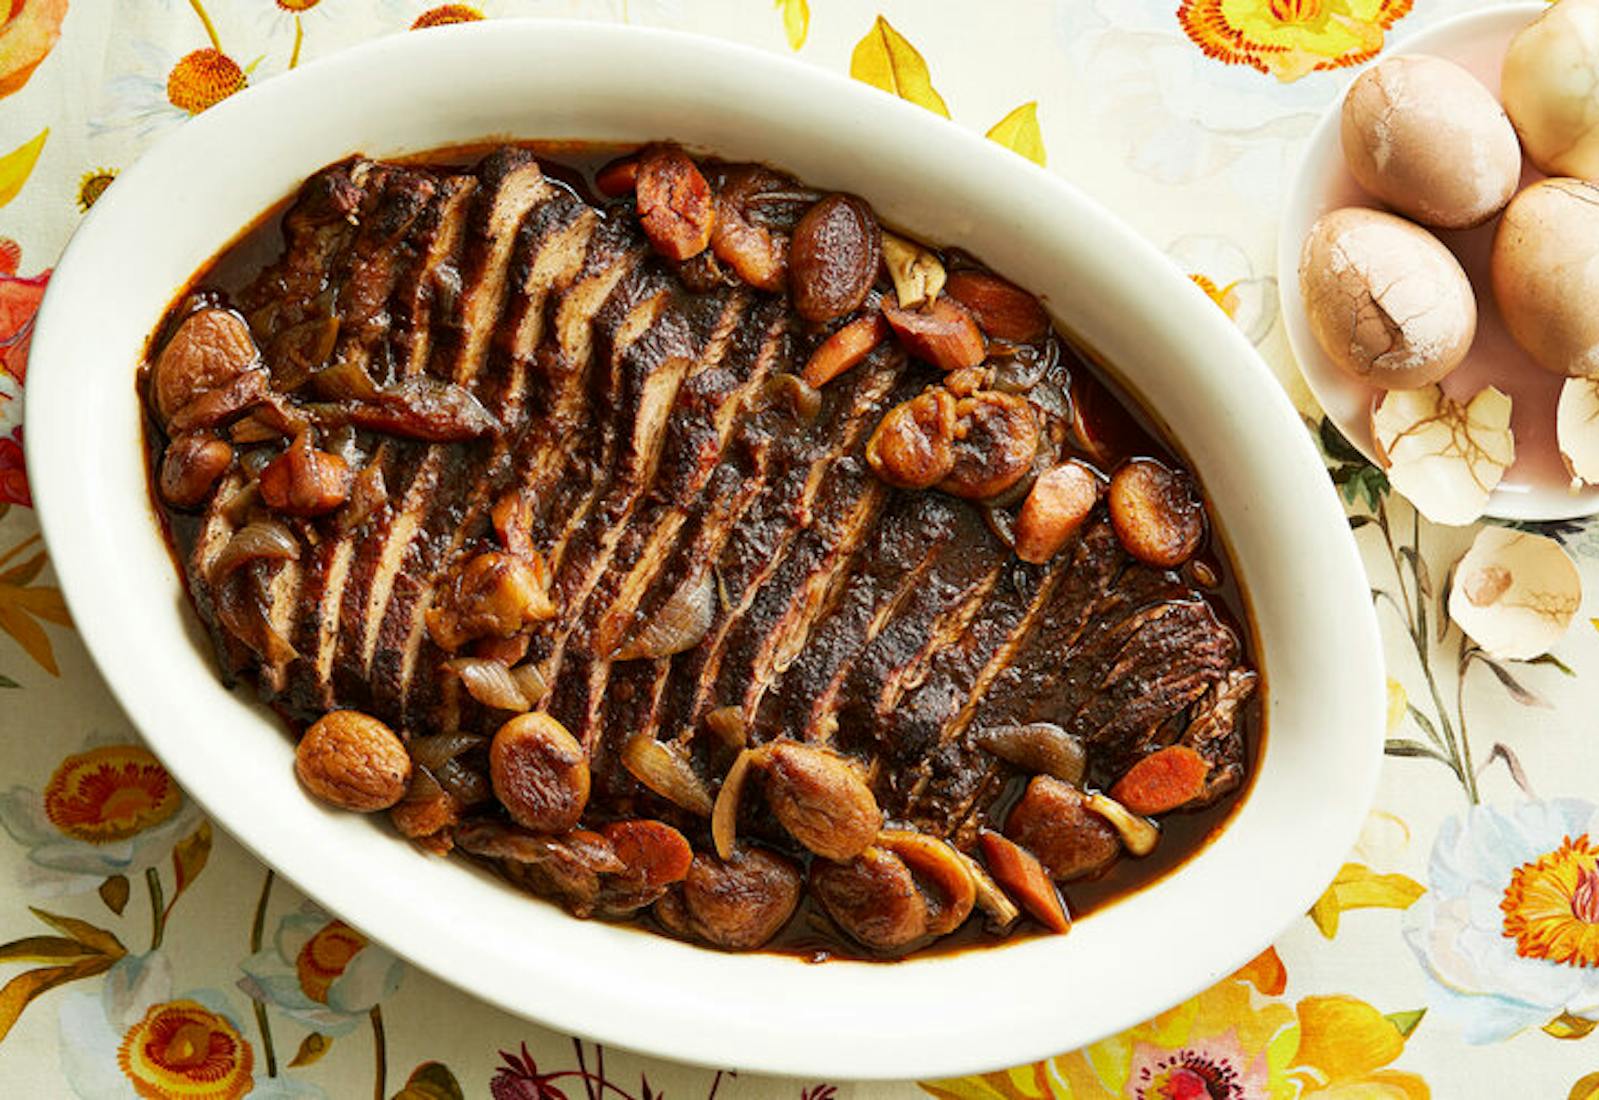 Sliced brisket in large casserole dish with whole eggs atop floral tablecloth.